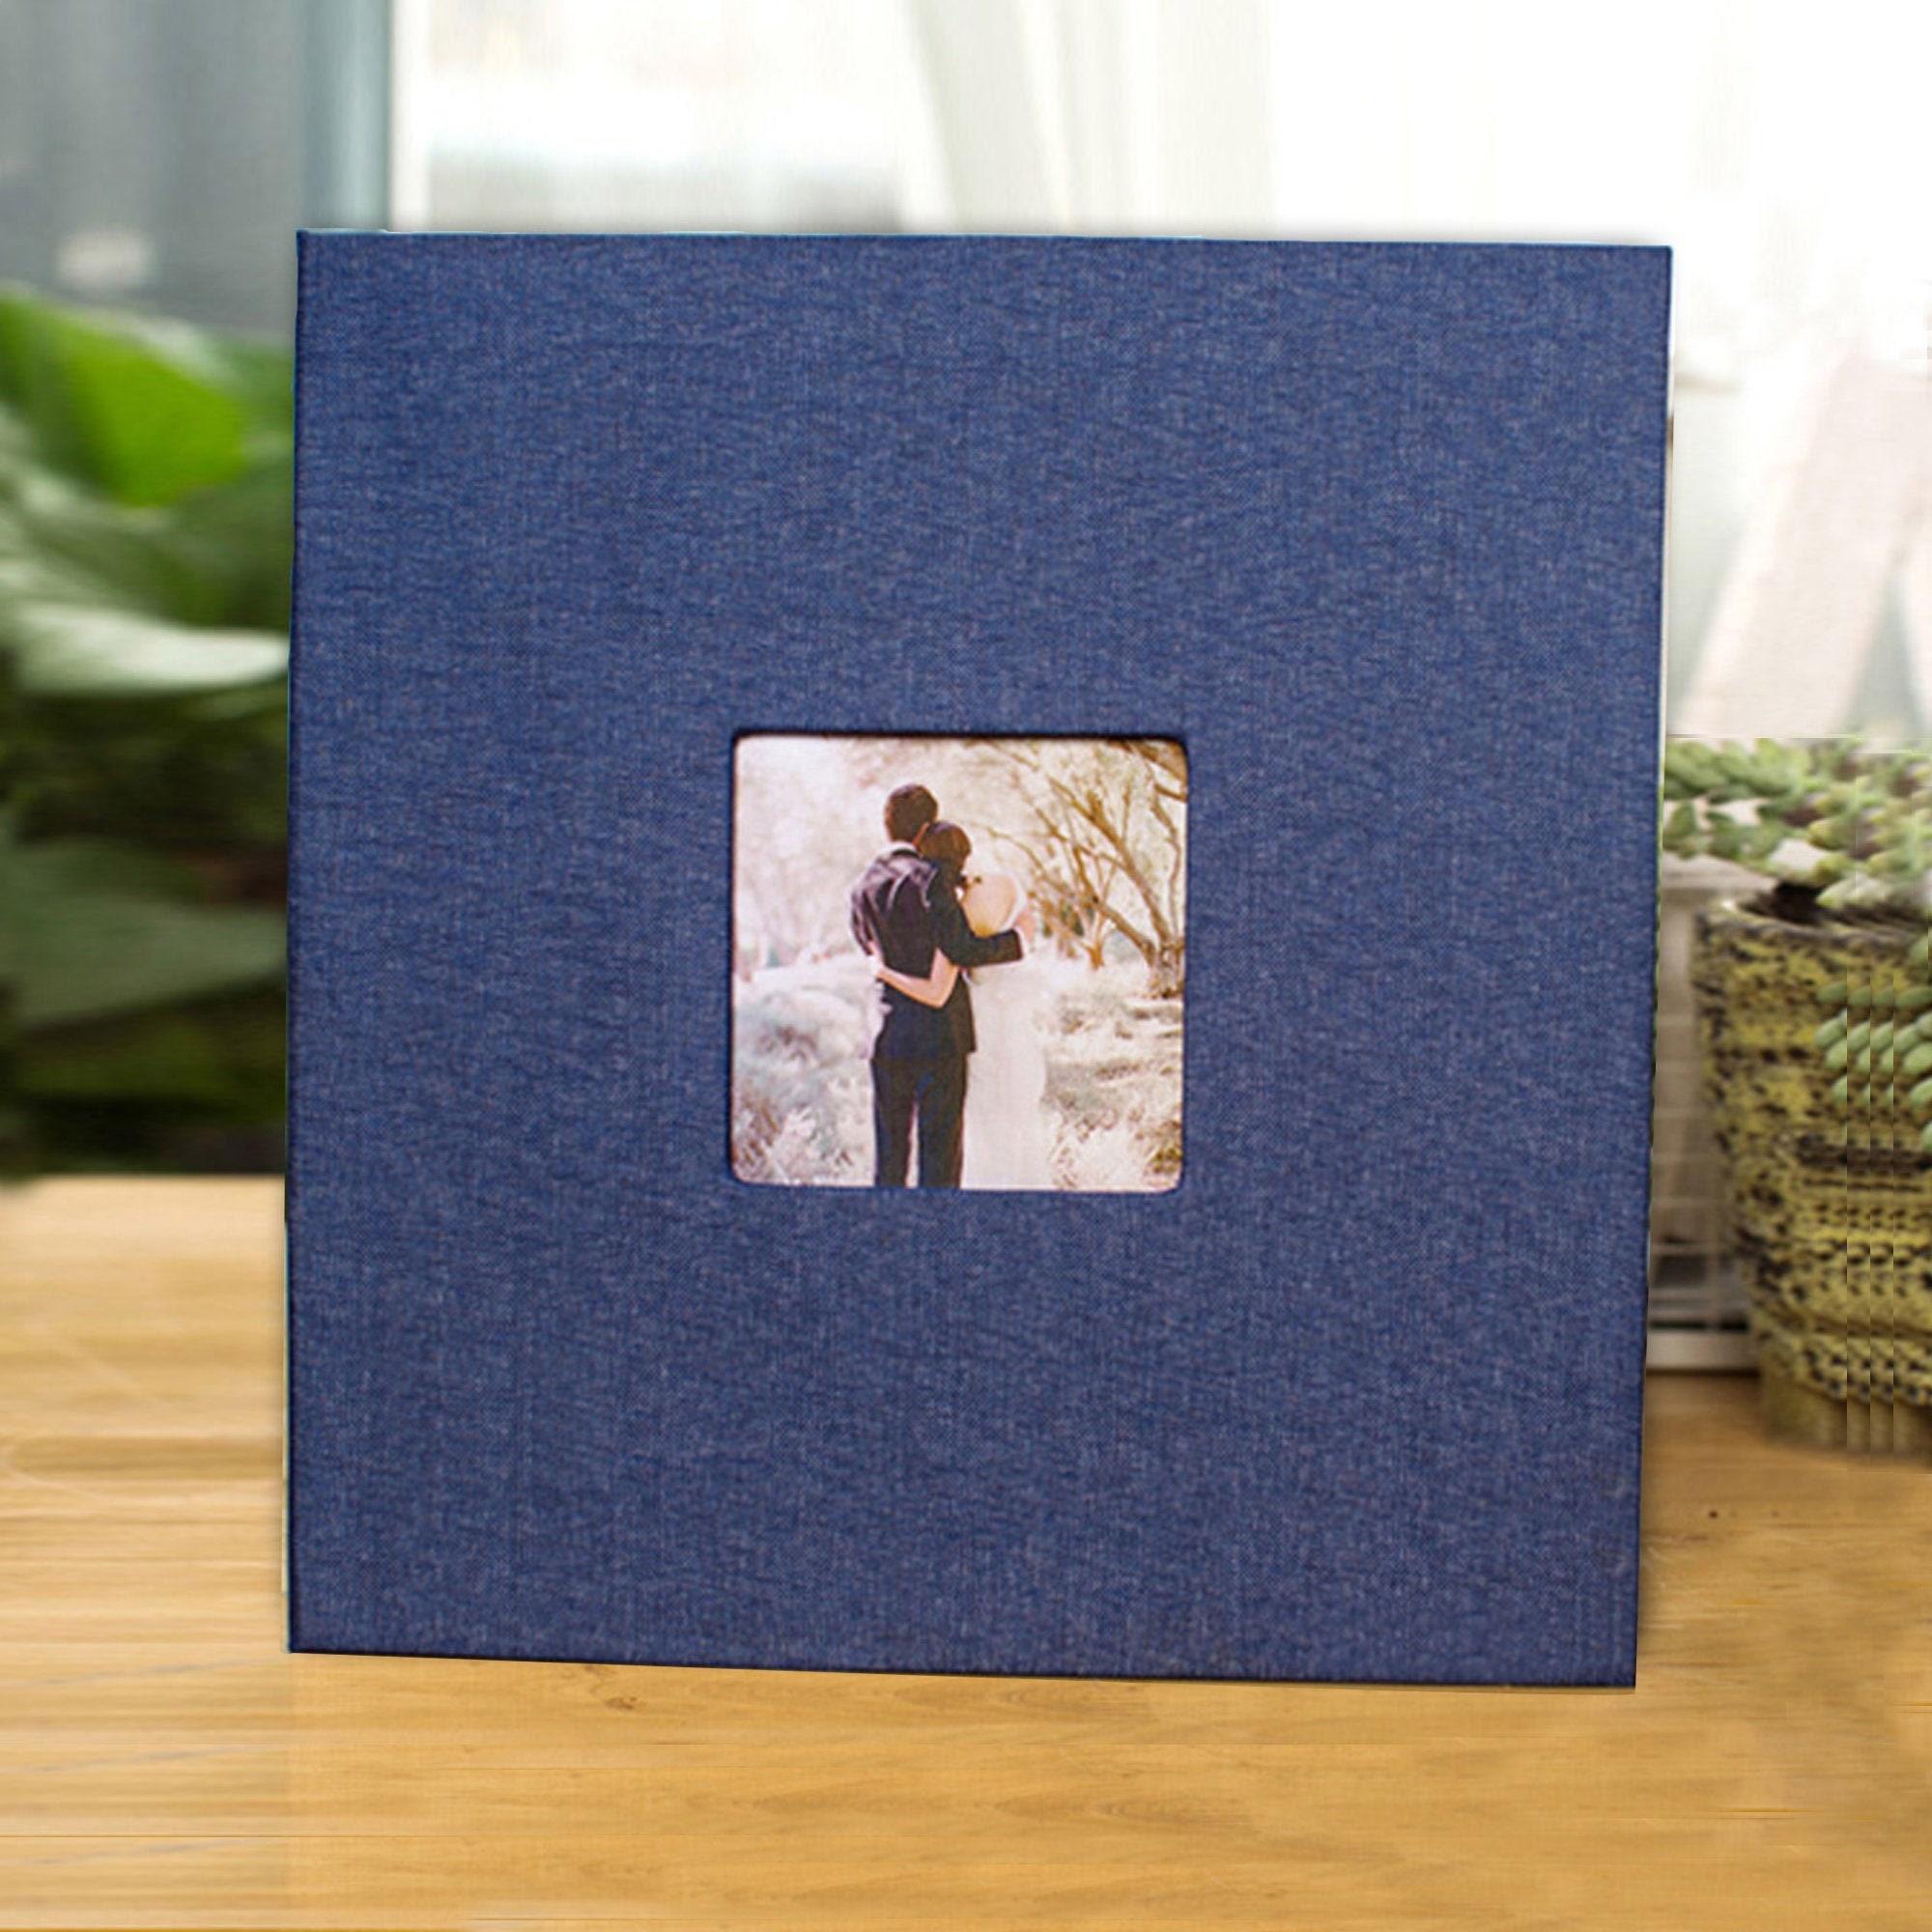 Personalized Photo Album 5x7 for 200 Photos. Pocket Album Photo Album.  Wedding Slip-in Photo Album. Album With Sleeves for 5x7 Photos. 